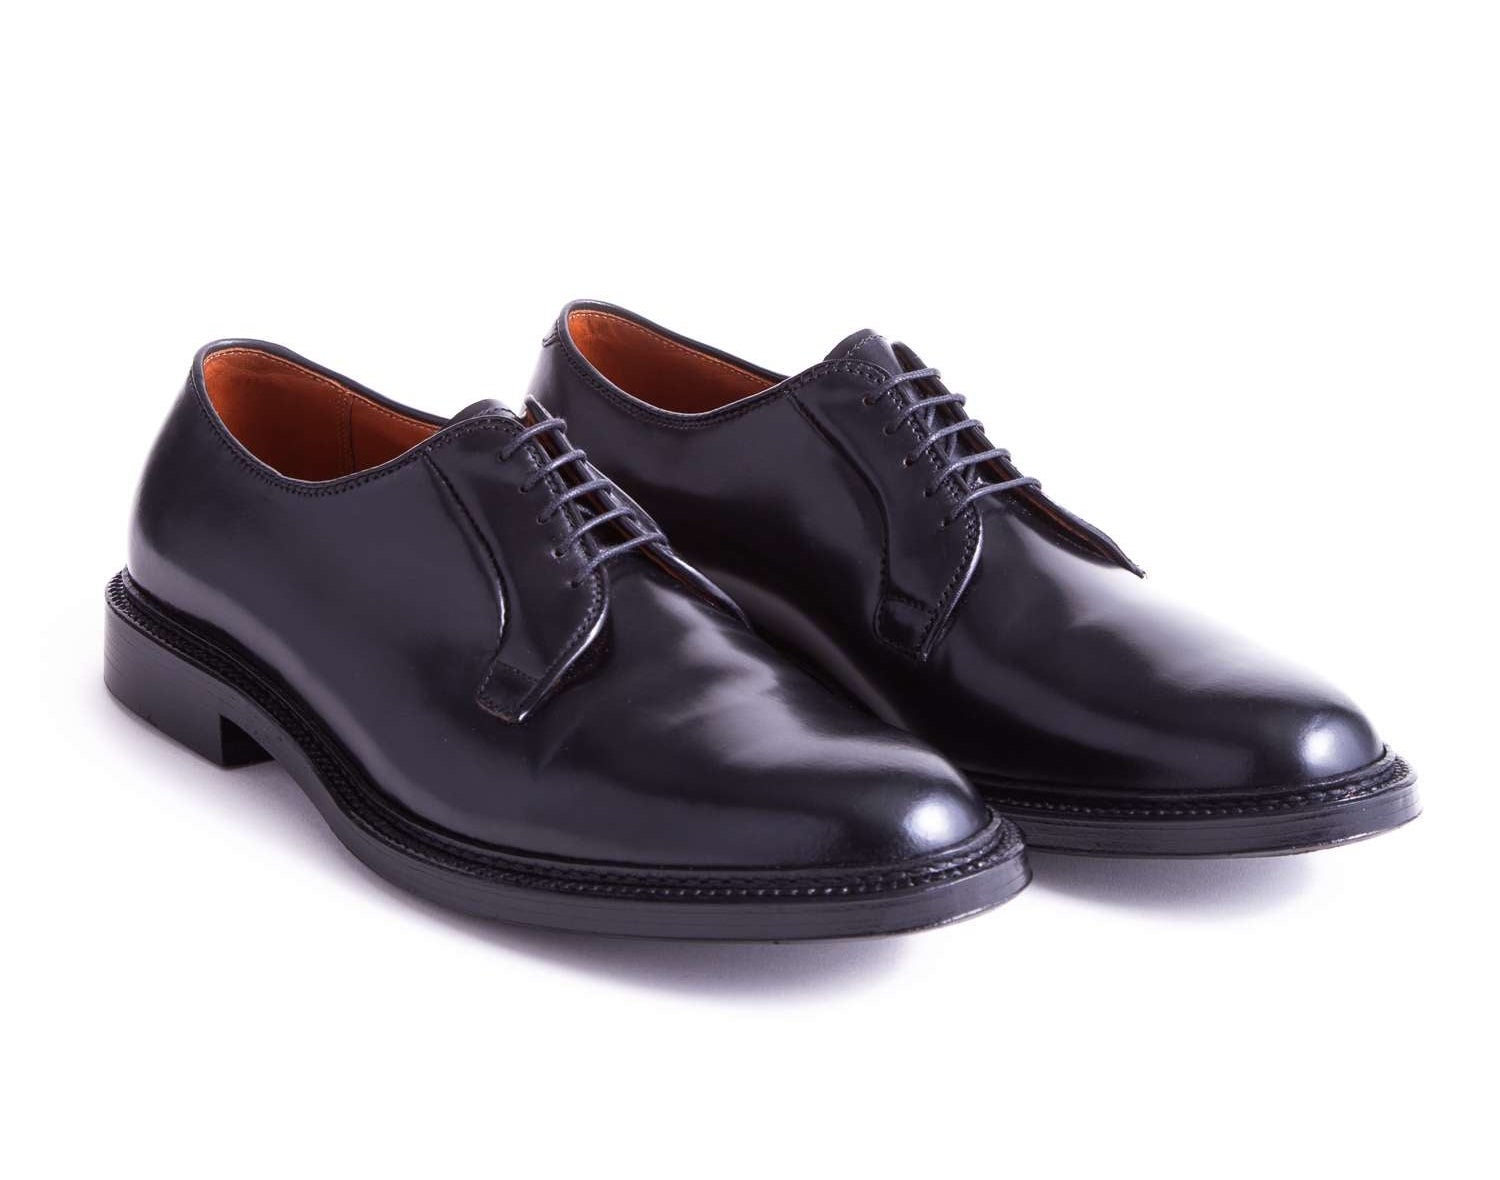 The 7 Best Derby Shoes to Add to Your Shoe Arsenal - The Manual